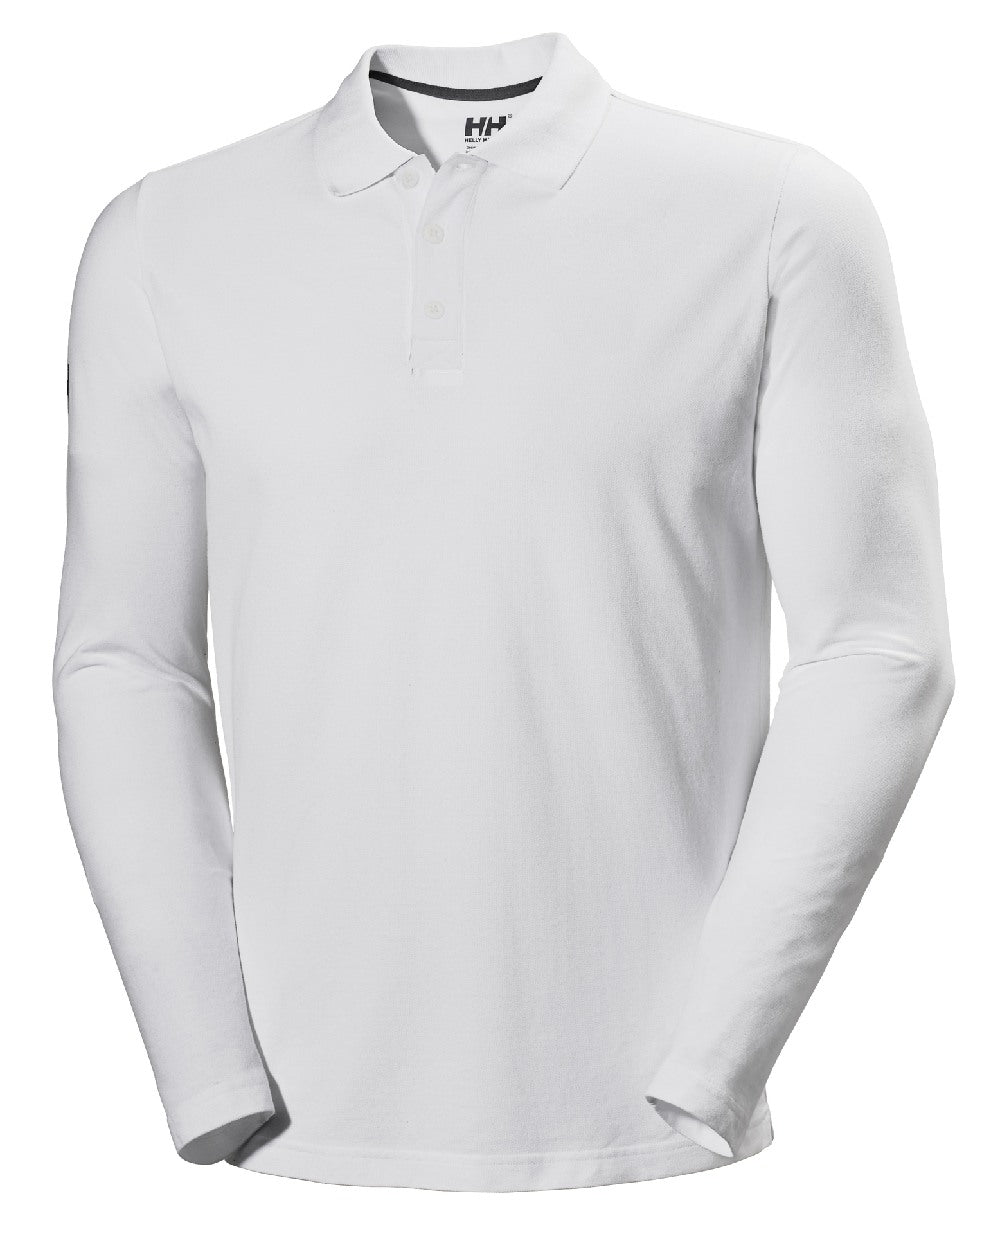 White coloured Helly Hansen Mens Crewline Long Sleeves Polo Shirt on white background 